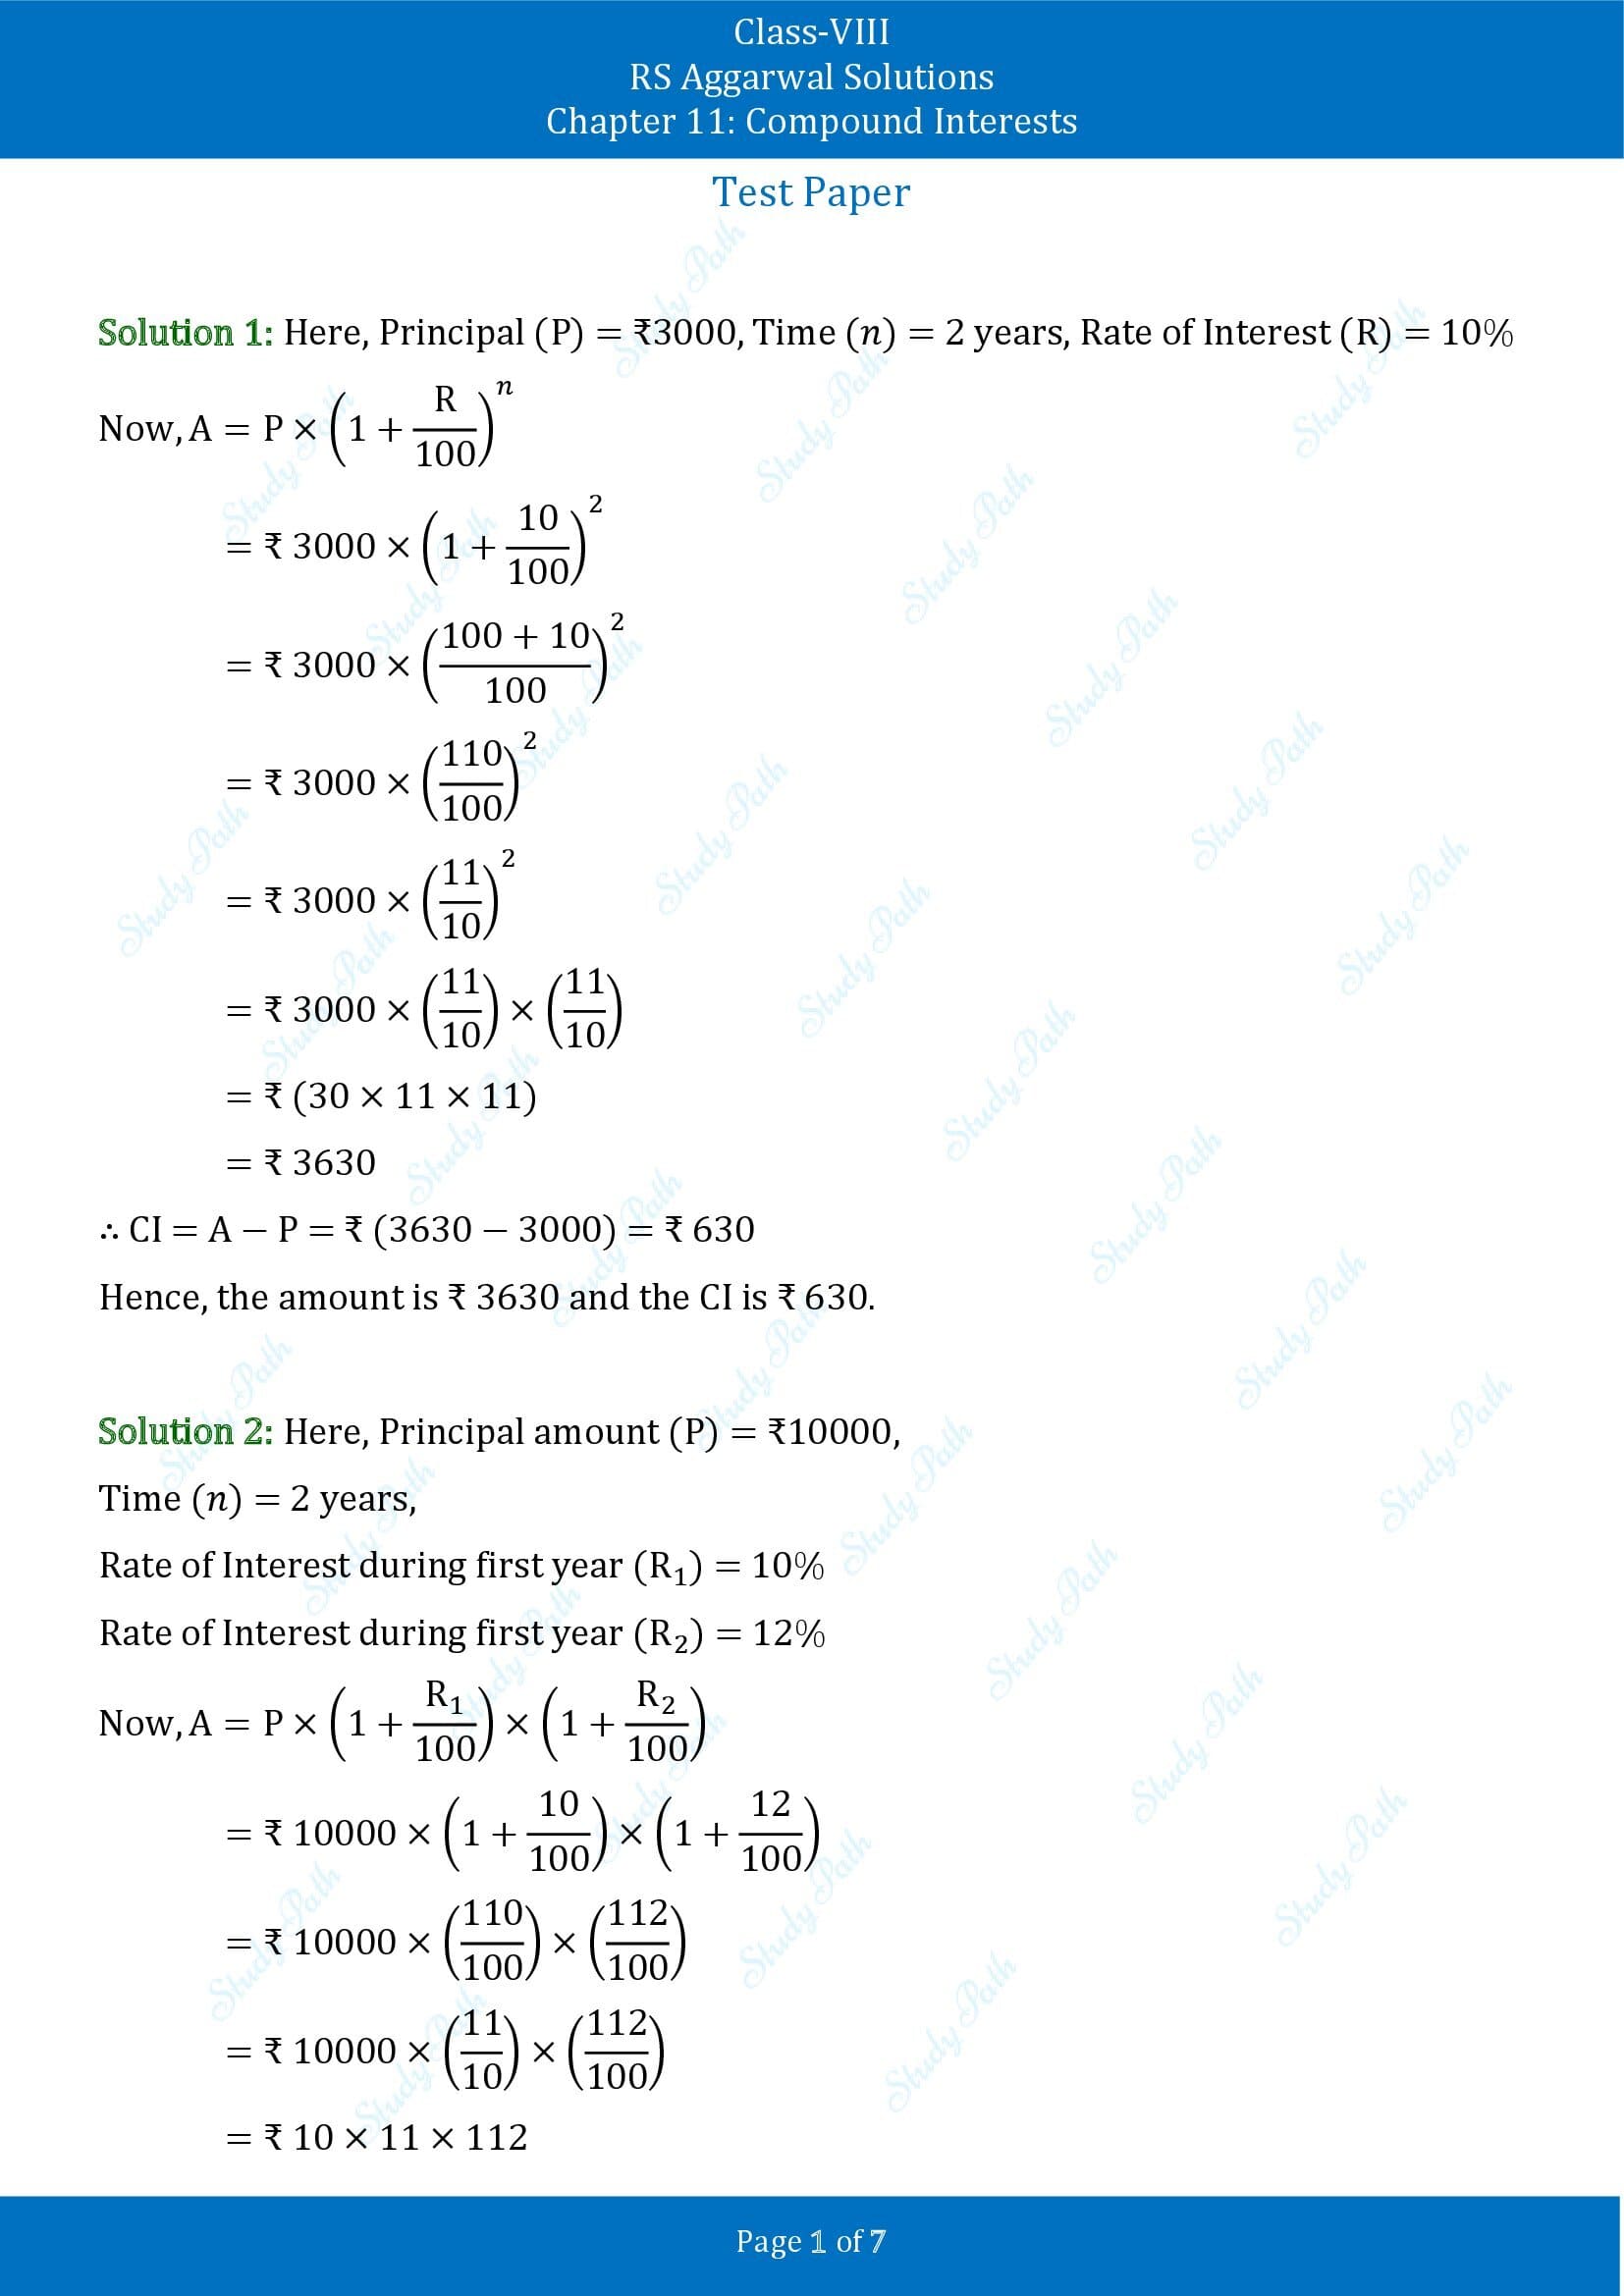 RS Aggarwal Solutions Class 8 Chapter 11 Compound Interests Test Paper 00001